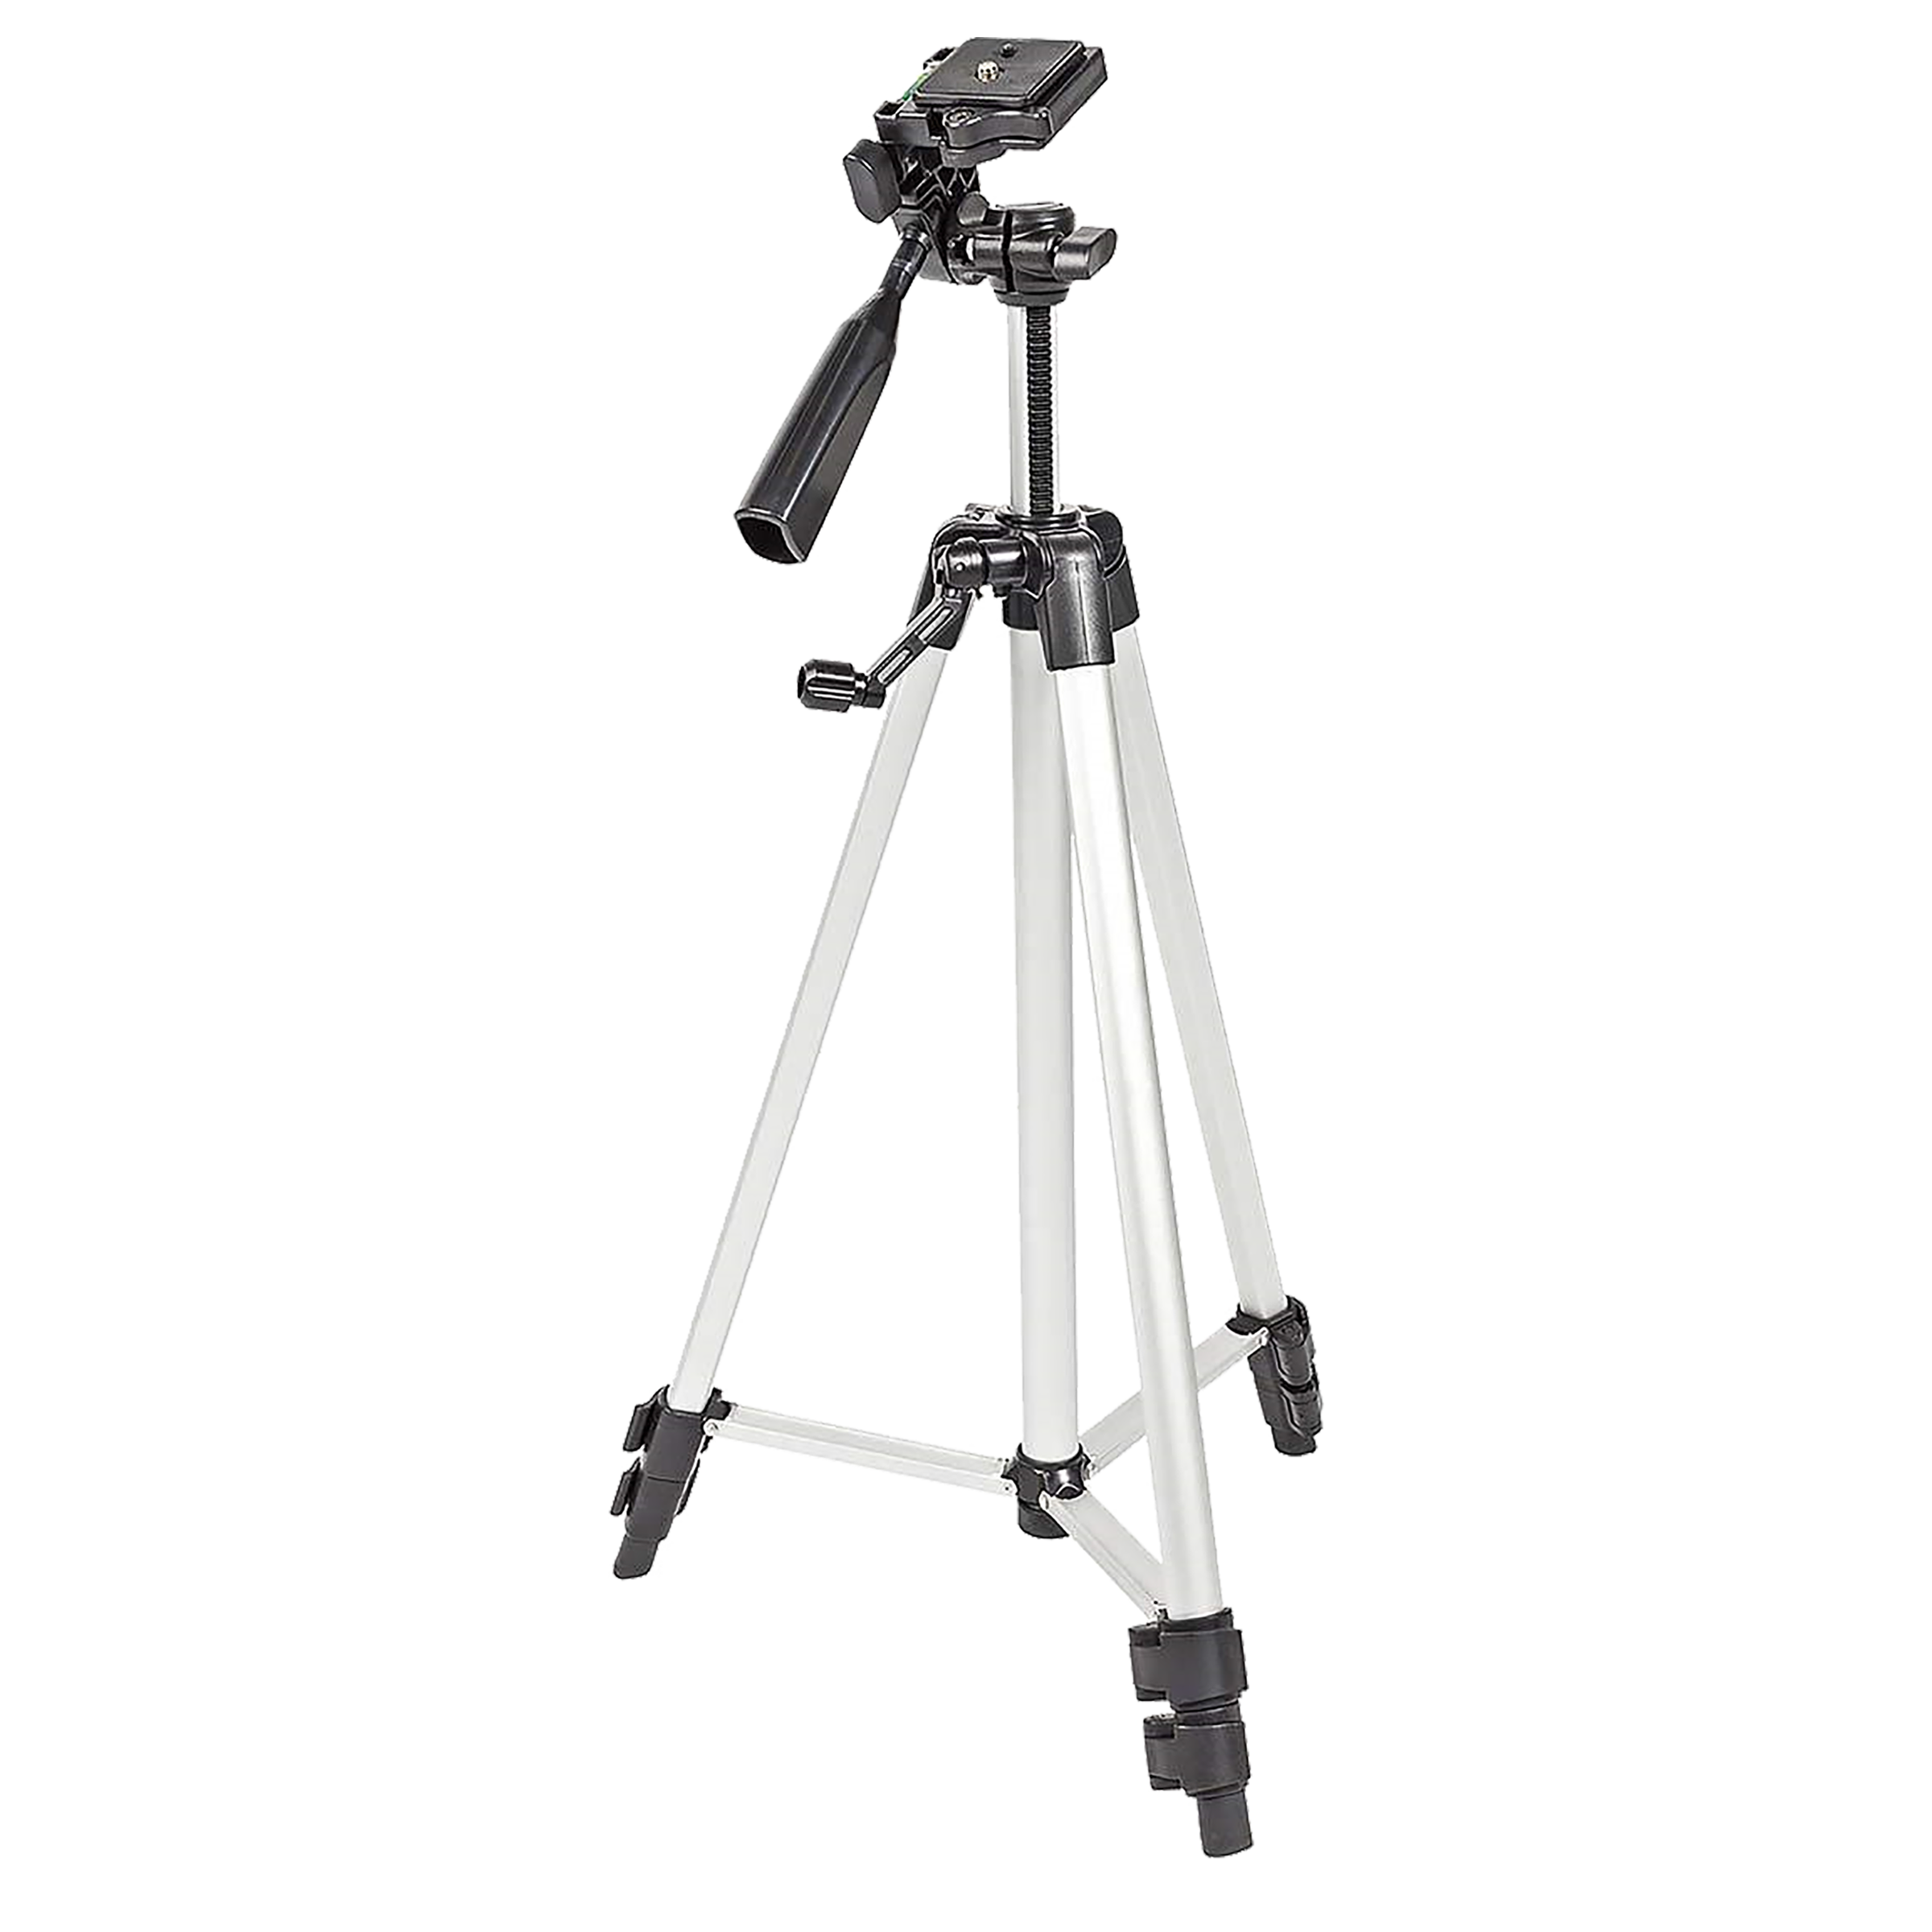 Nedis Adjustable 134cm Tripod For Point, Shoot Camera (Digital Camera) & Mobile Phones (Up to 3 Kg, 3-way Friction, TPOD2200GY, Silver/Black)_1